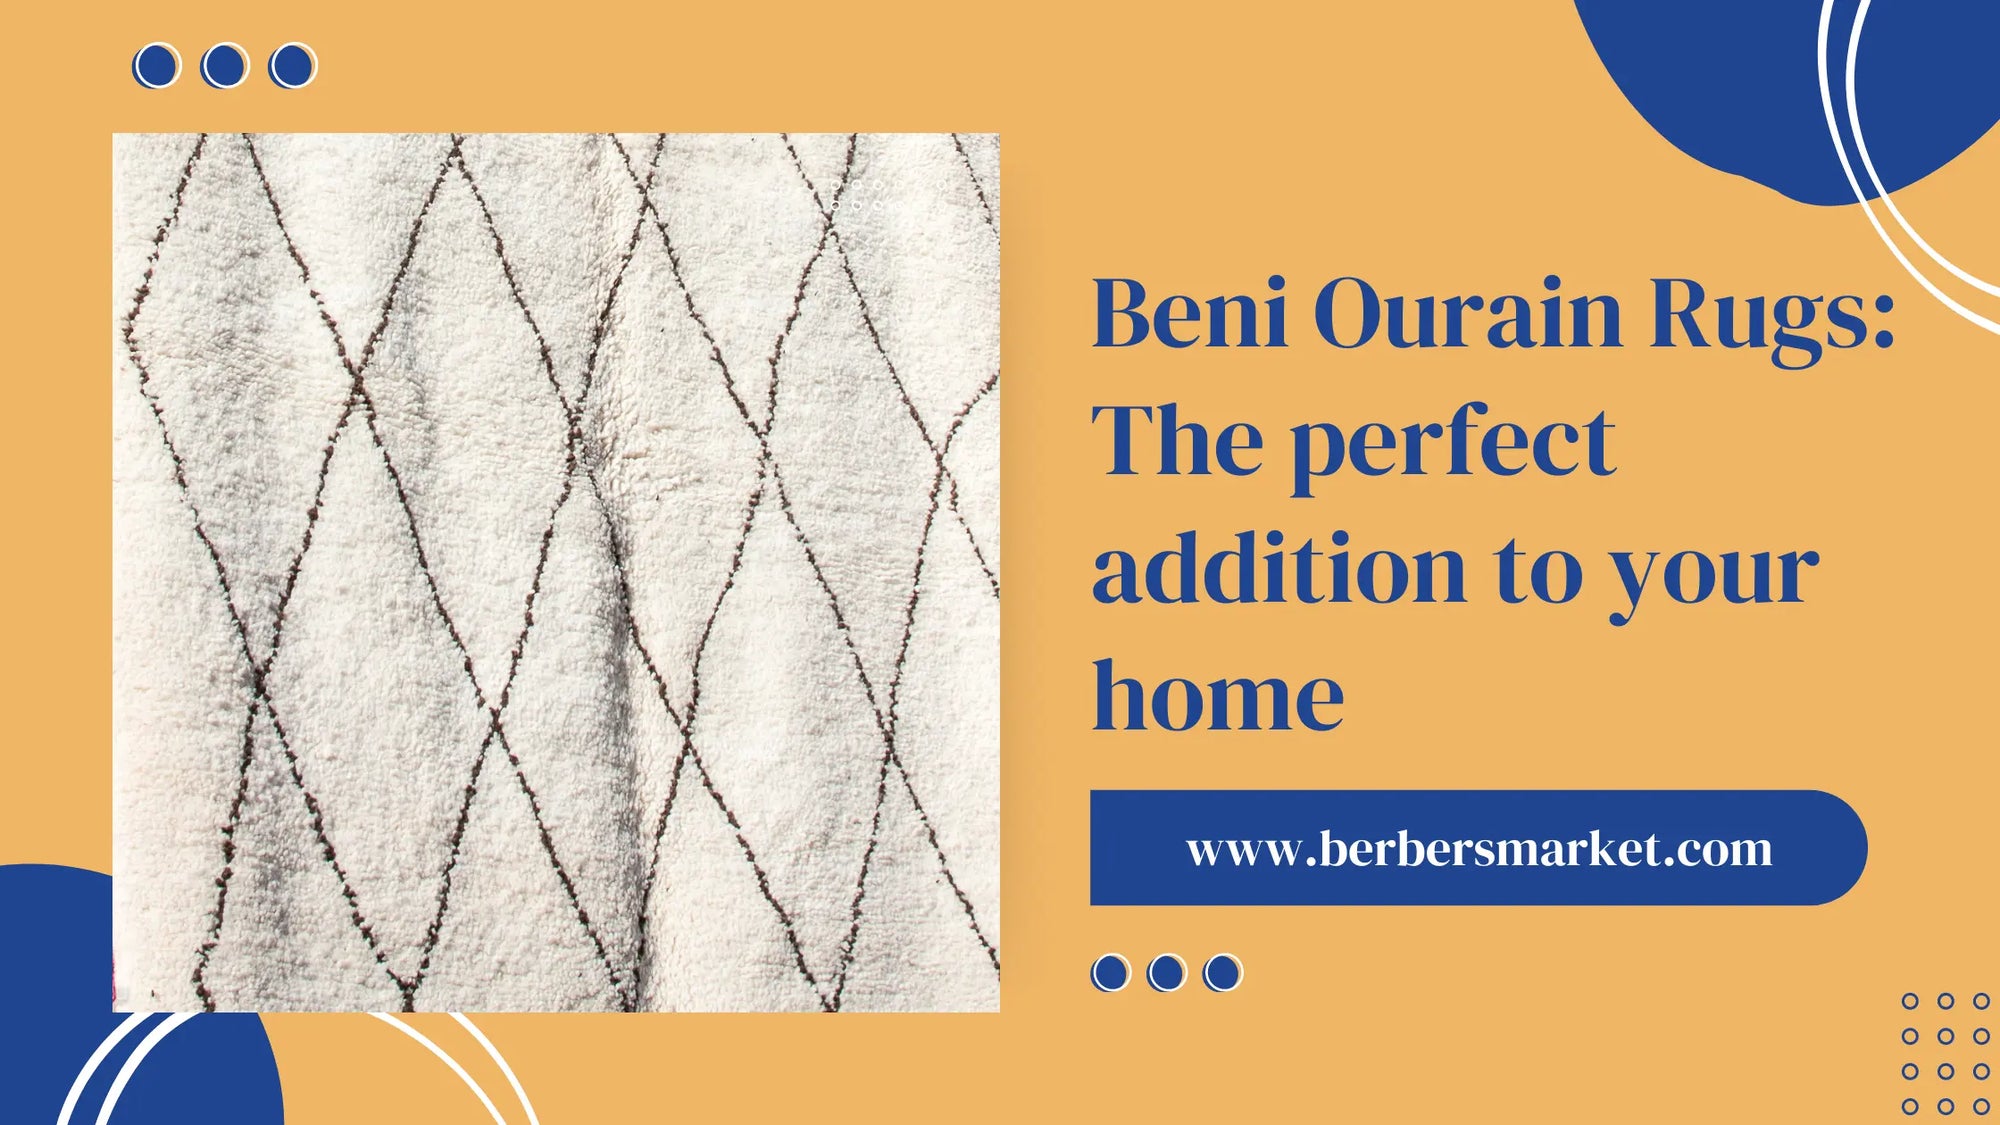 Blog banner talking about: "Beni Ourain Rugs: The perfect addition to your home" with a picture showing a close-up on a Beni ourain rug with a trellis pattern. 